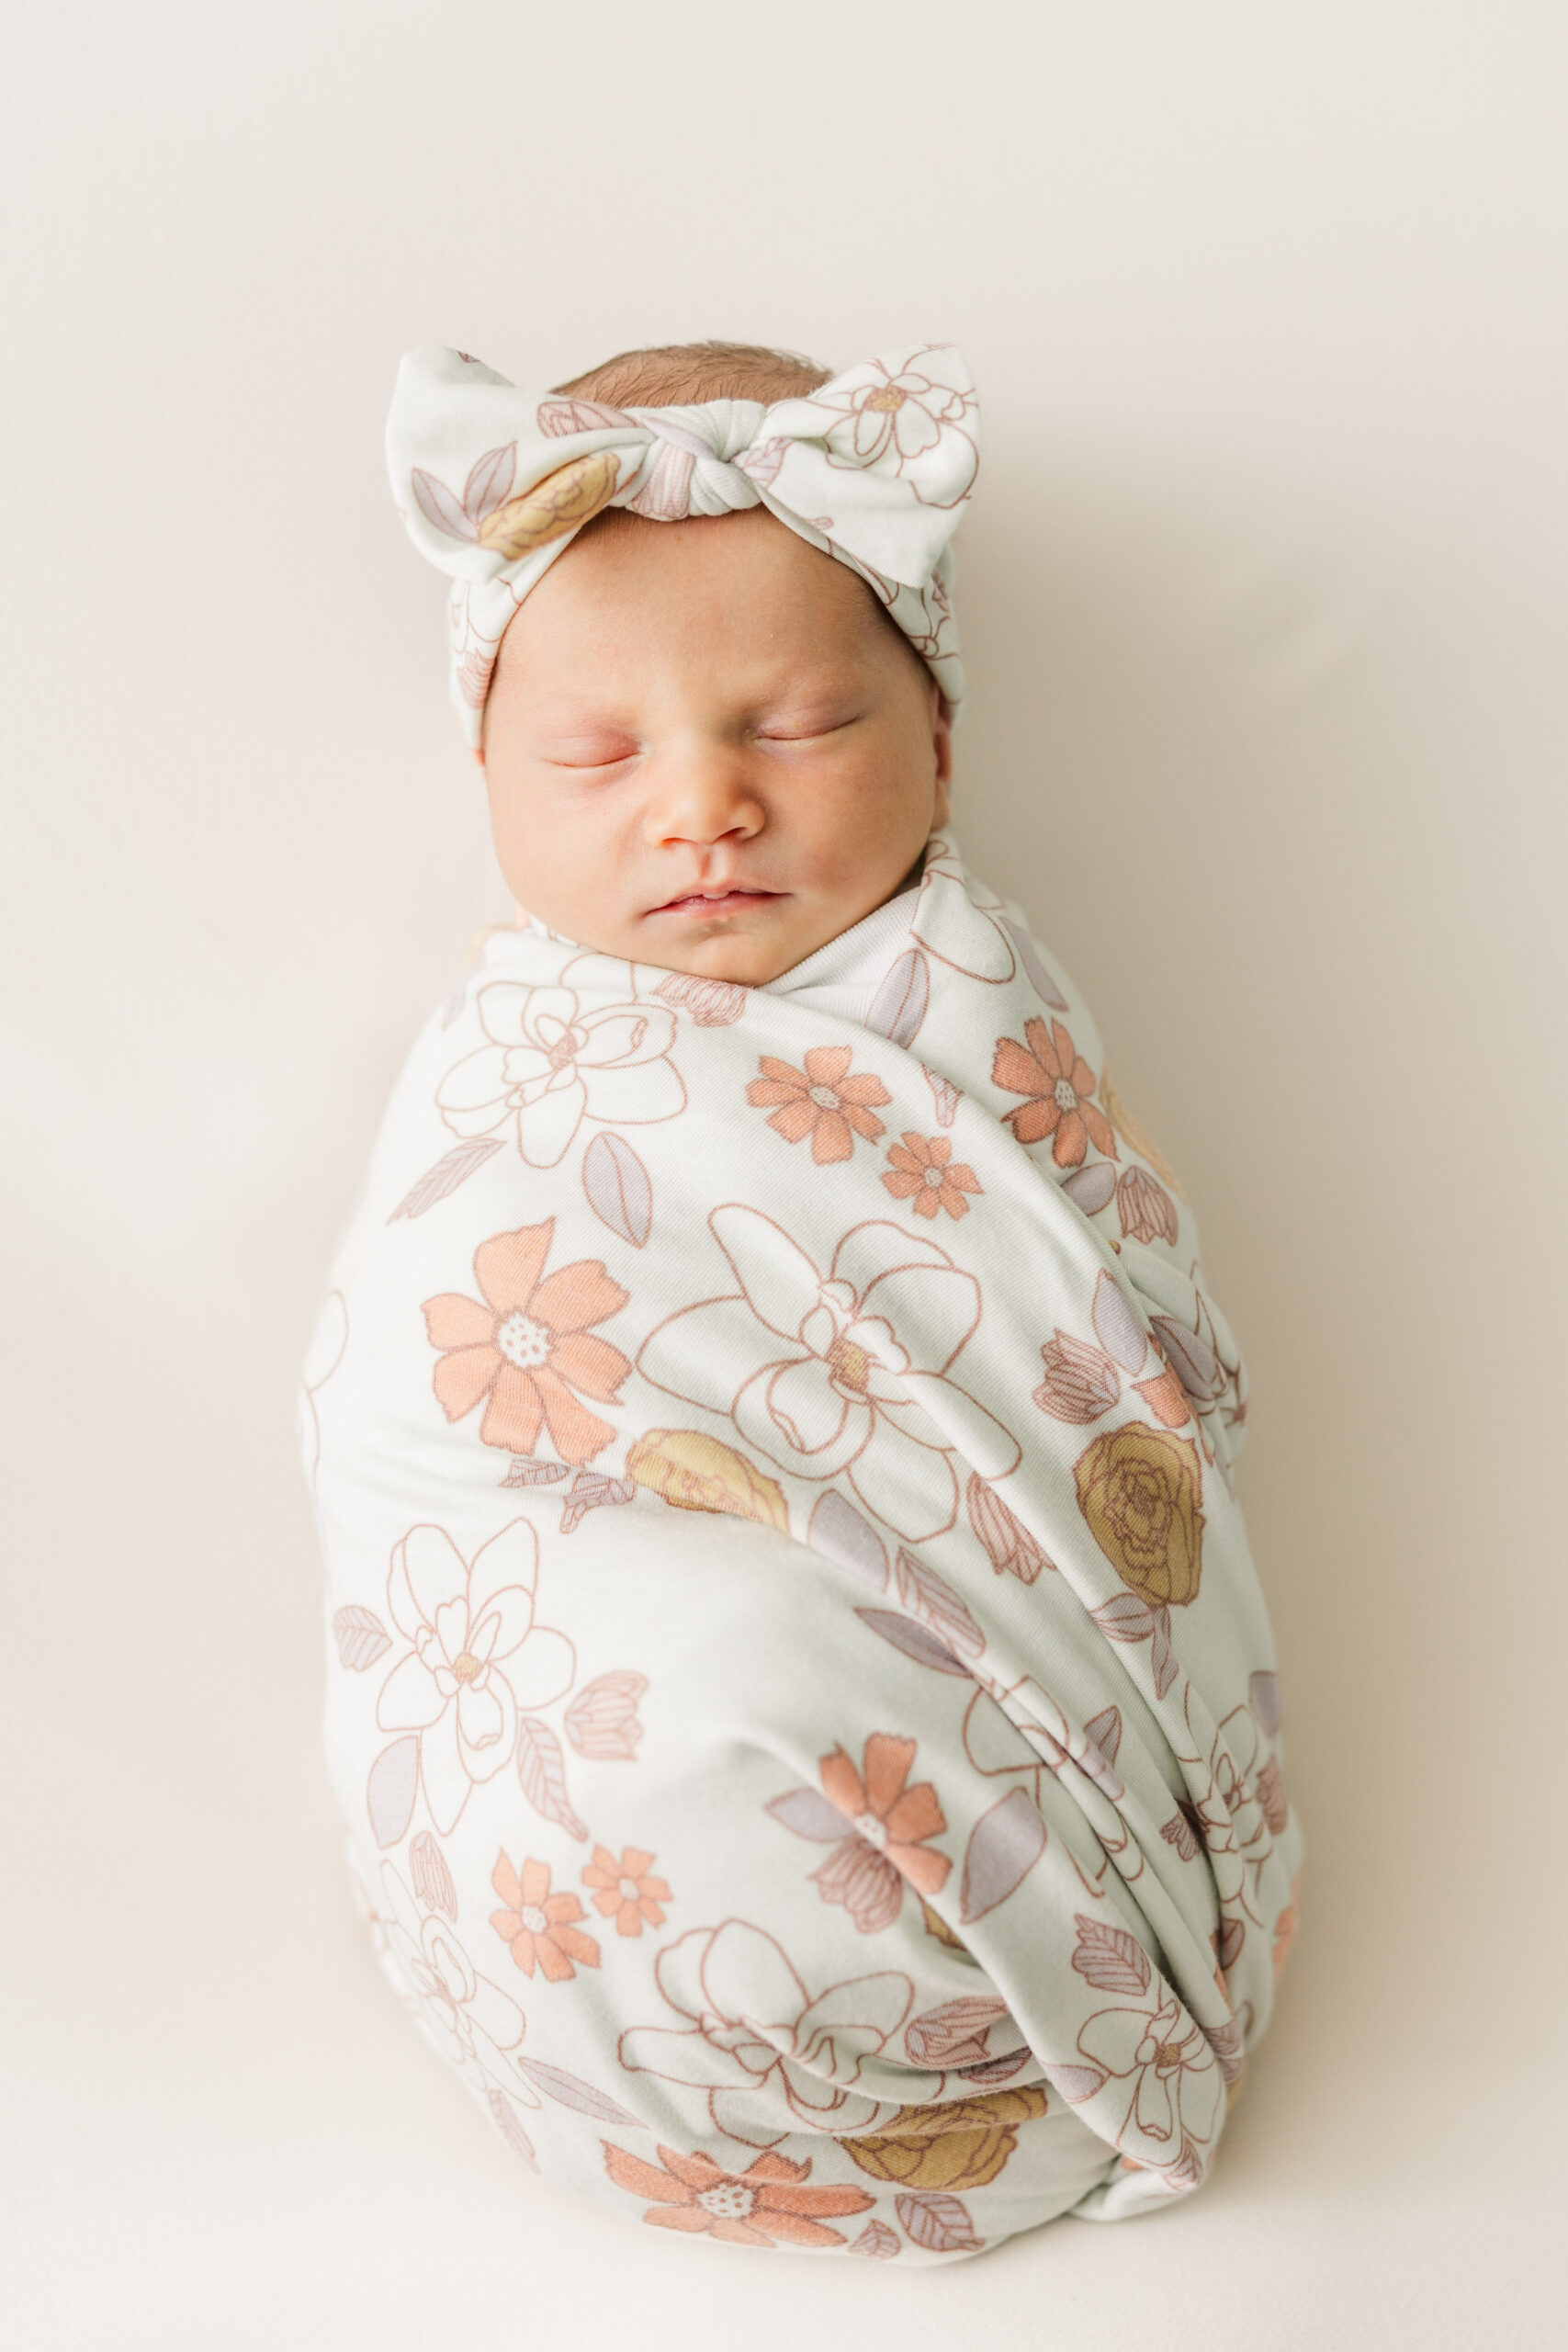 Baby girl swaddled for Peterson Family Newborn Session in Fort Collins, CO